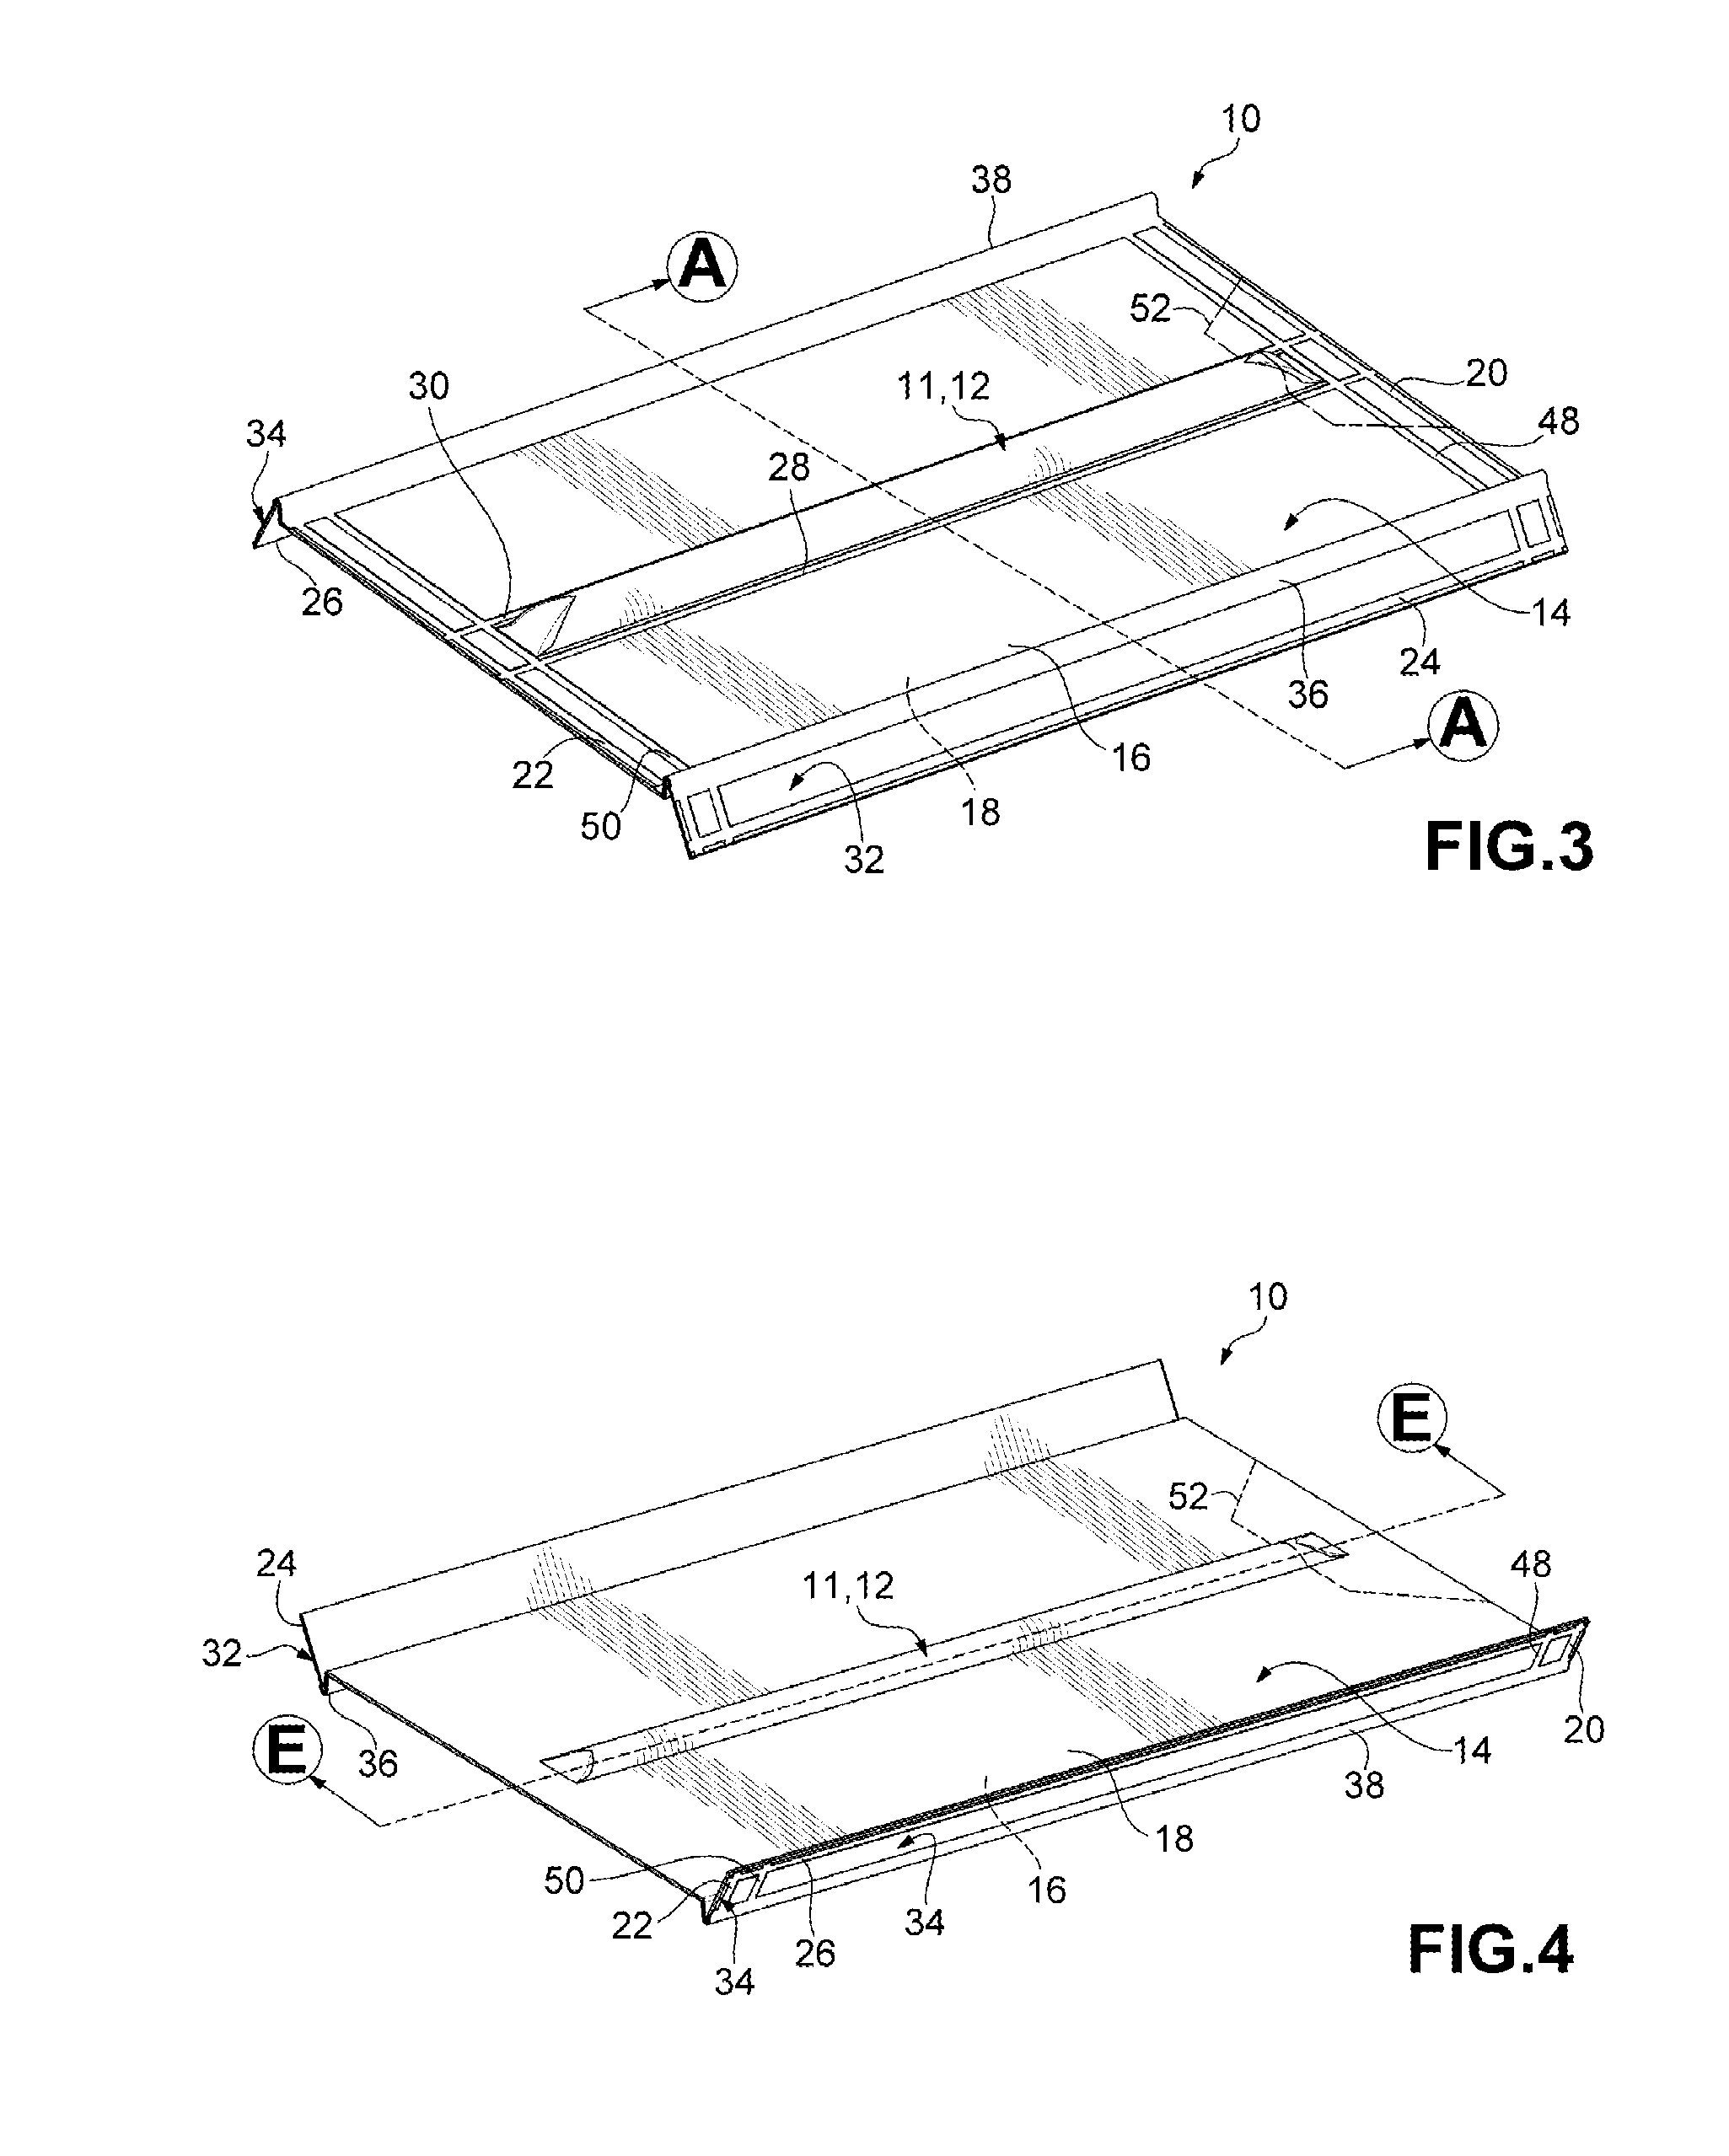 Methods and Systems for Mass Distribution of Supply Packs